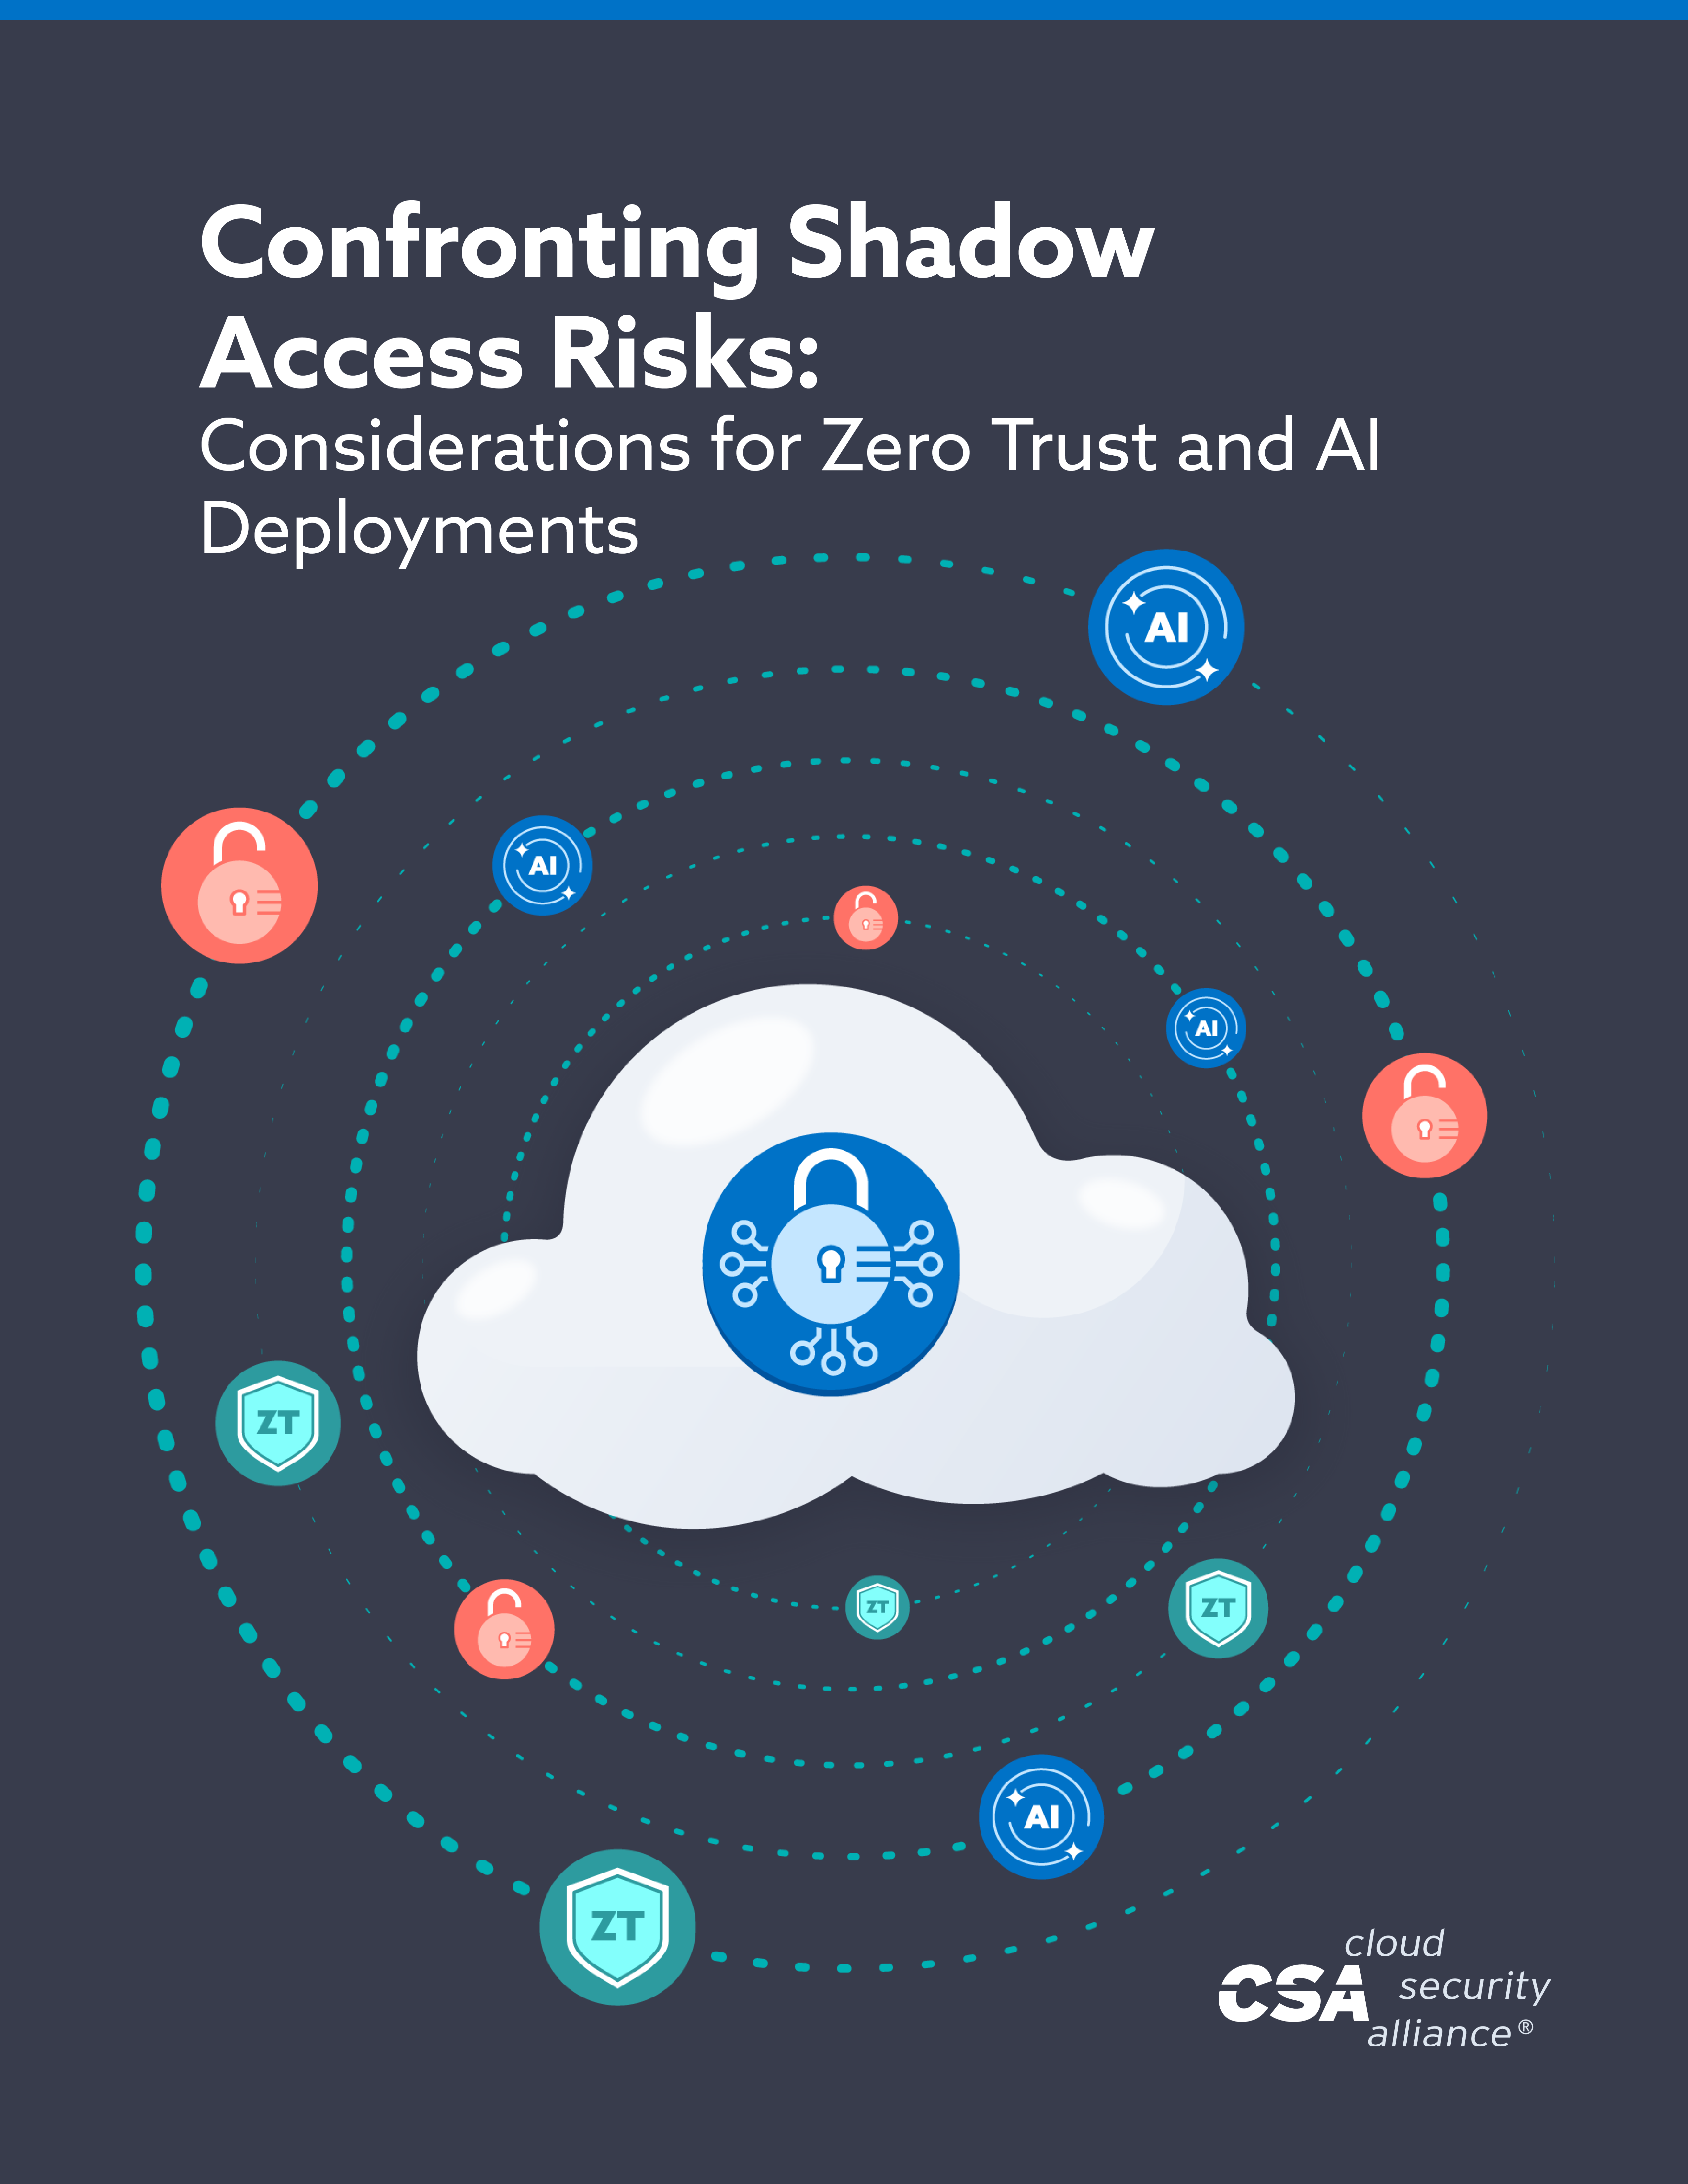 Confronting Shadow Access Risks: Considerations for Zero Trust and Artificial Intelligence Deployments